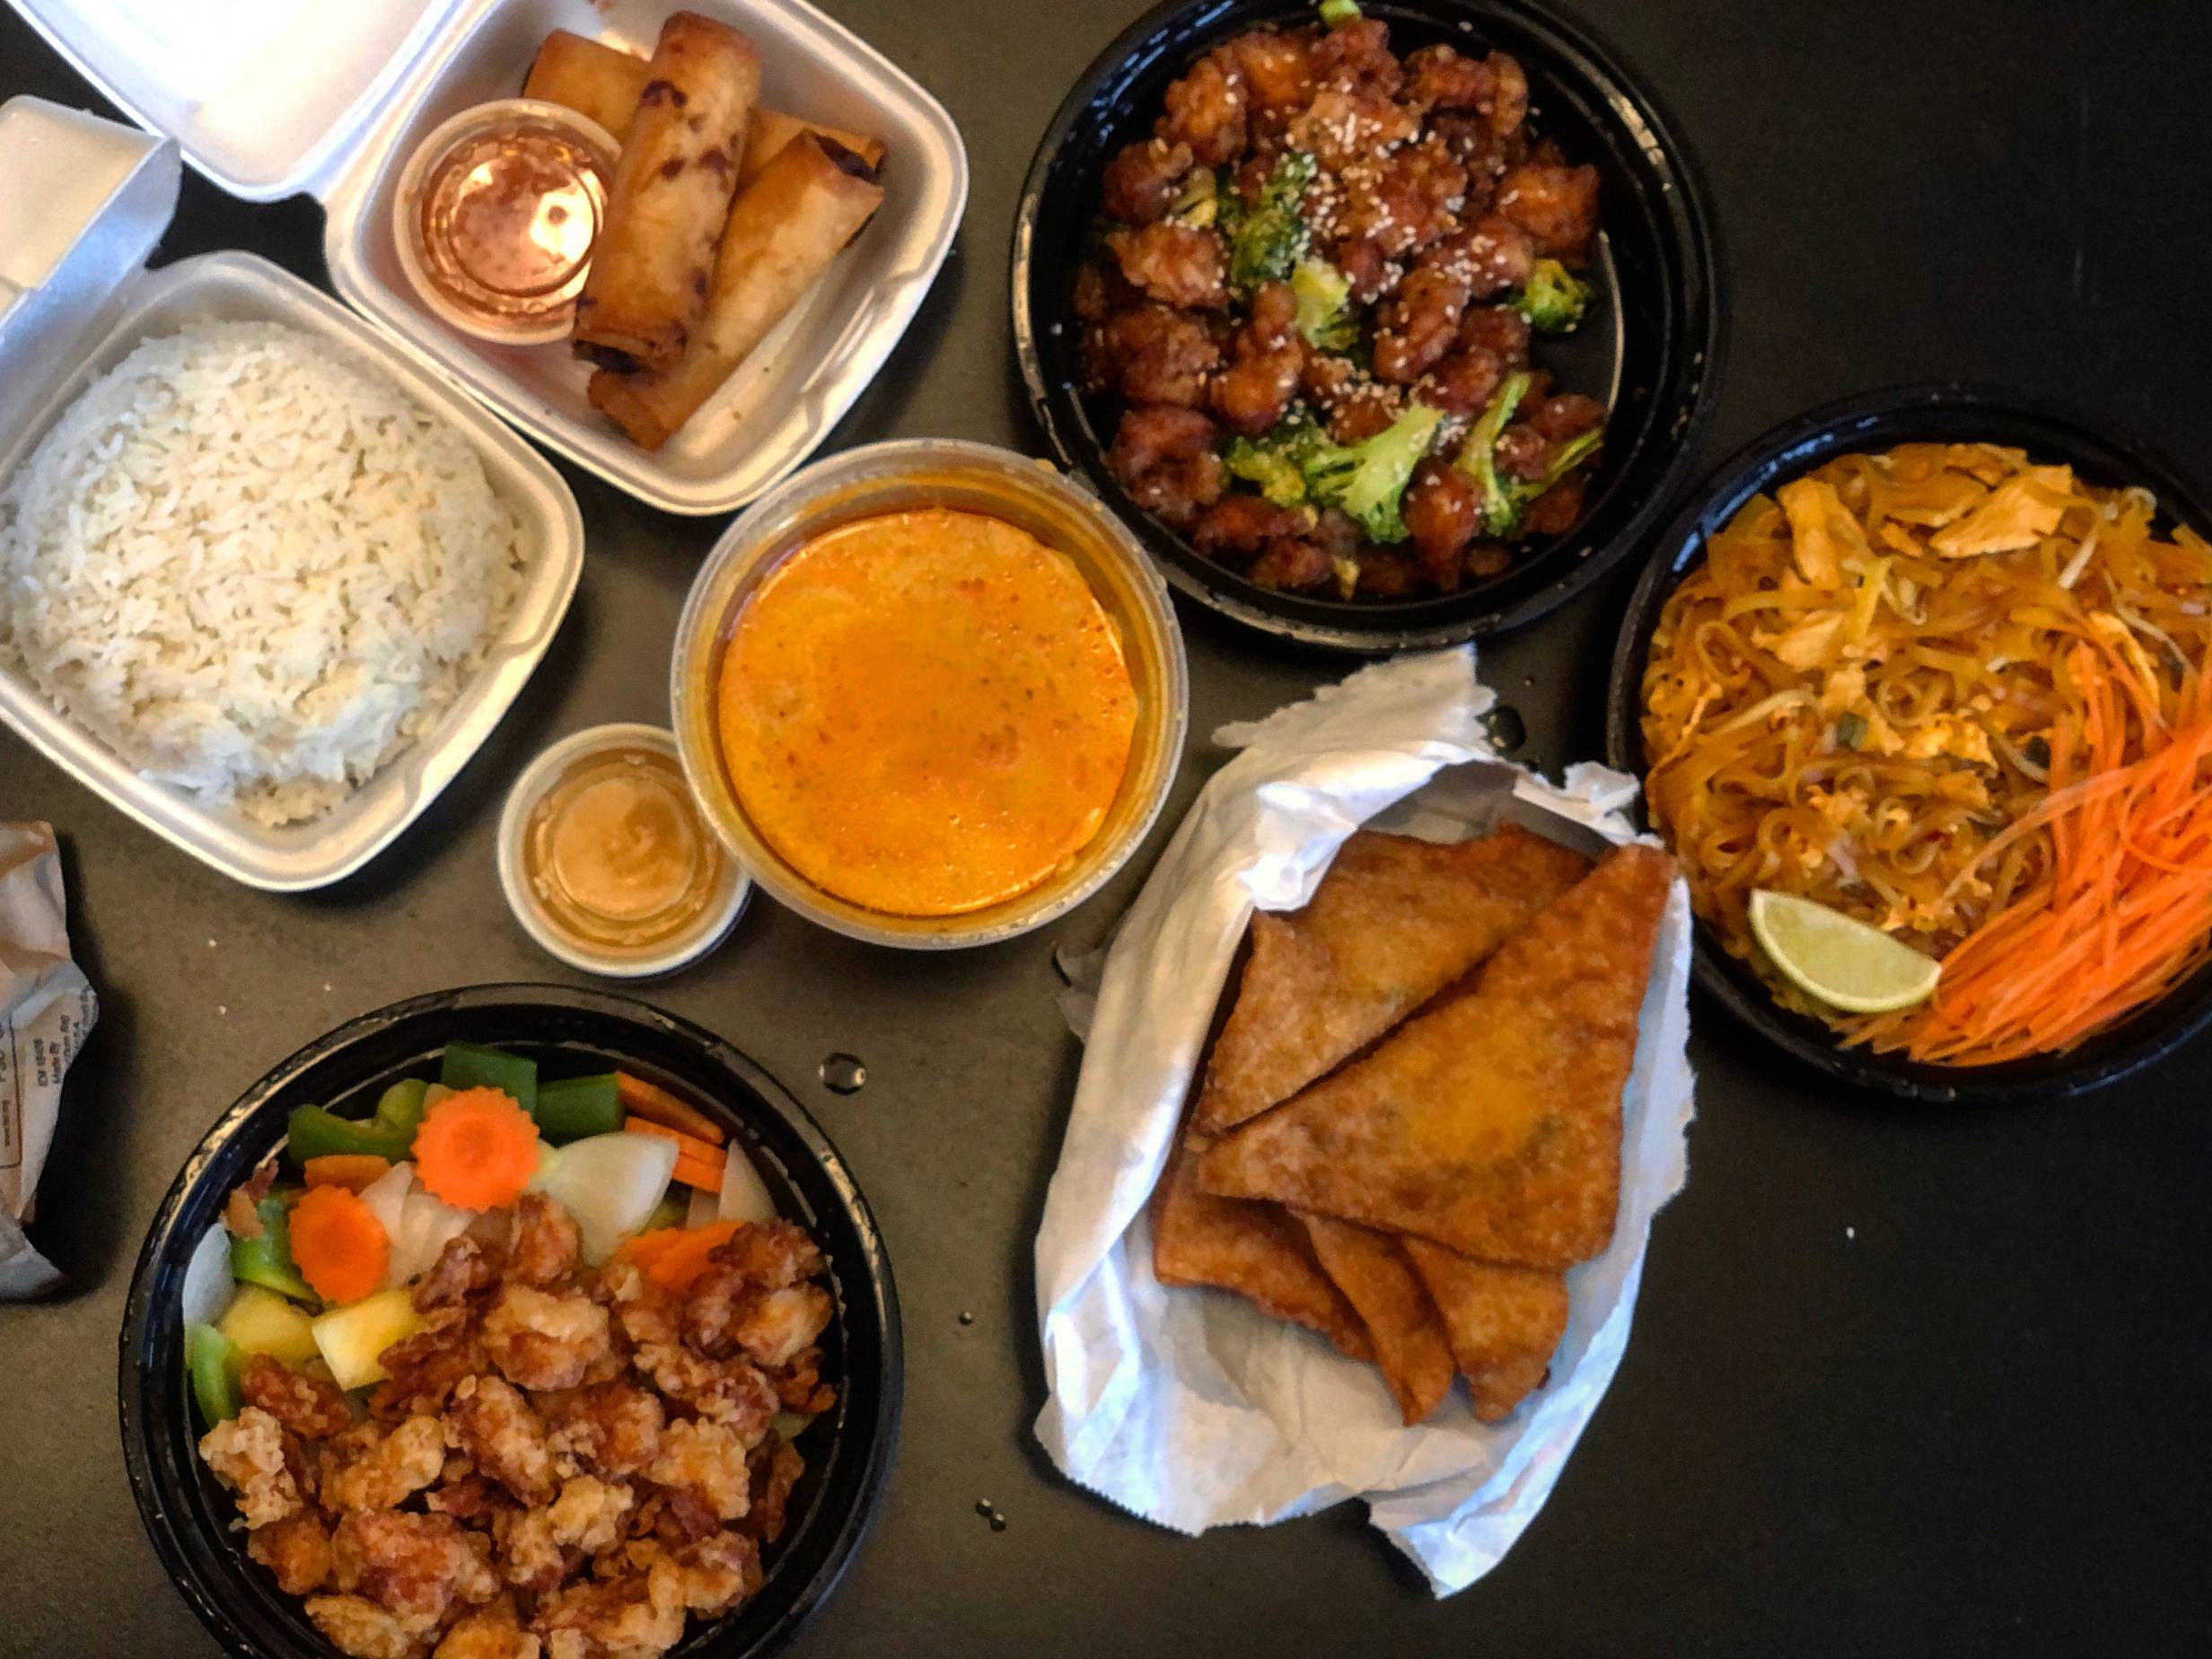 A variety of takeout dishes lay on a black table. A container of steamed white rice in a styrofoam square container, a small orange sauce in a plastic cup, a yellow curry in a plastic container, and two chicken dishes in black plastic circle containers. There is pad thai in a black circuluar plastic container, three egg rolls in a styrofoam container, and several triangular crab rangoons. Photo by Alyssa Buckley.